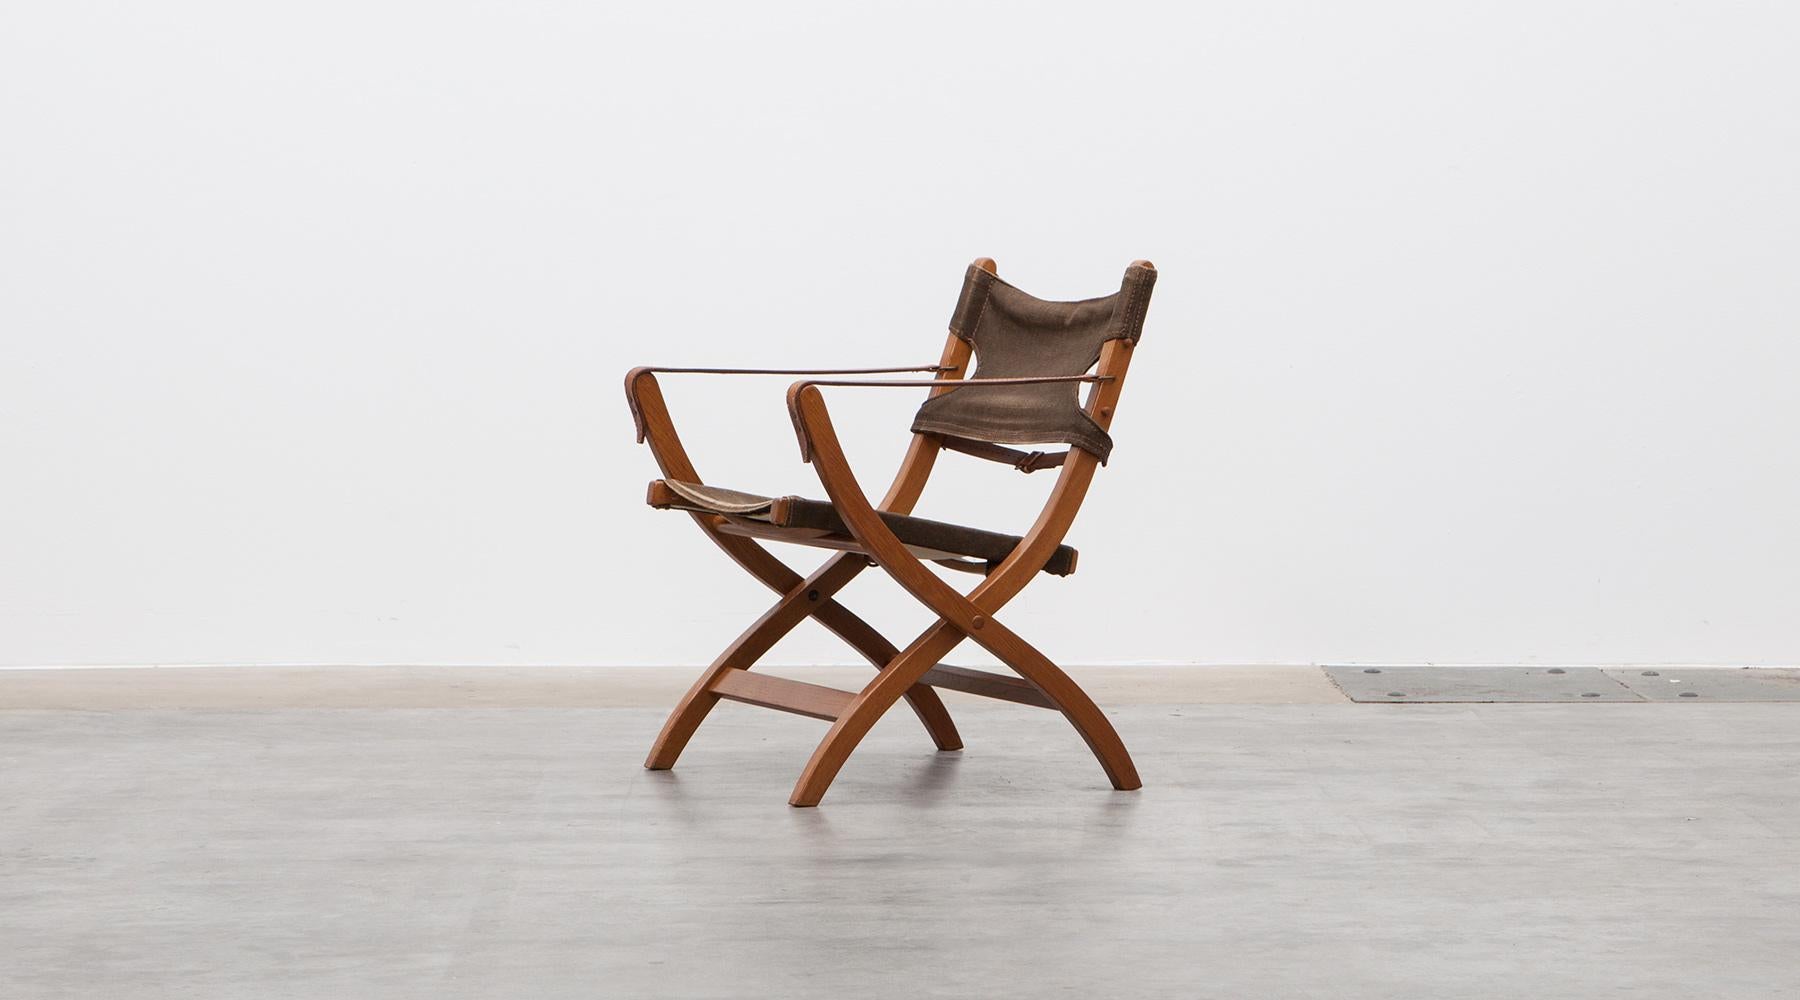 Safari chair, wood, linen fabric, leather by Poul Hundevad, Denmark, 1950s.

Classic reduced design with folding wood frame, back and seat in linen, armrests comes in leather. Designed by Poul Hundevad in 1950s. Manufactured by Vamdrup.

In 1960,